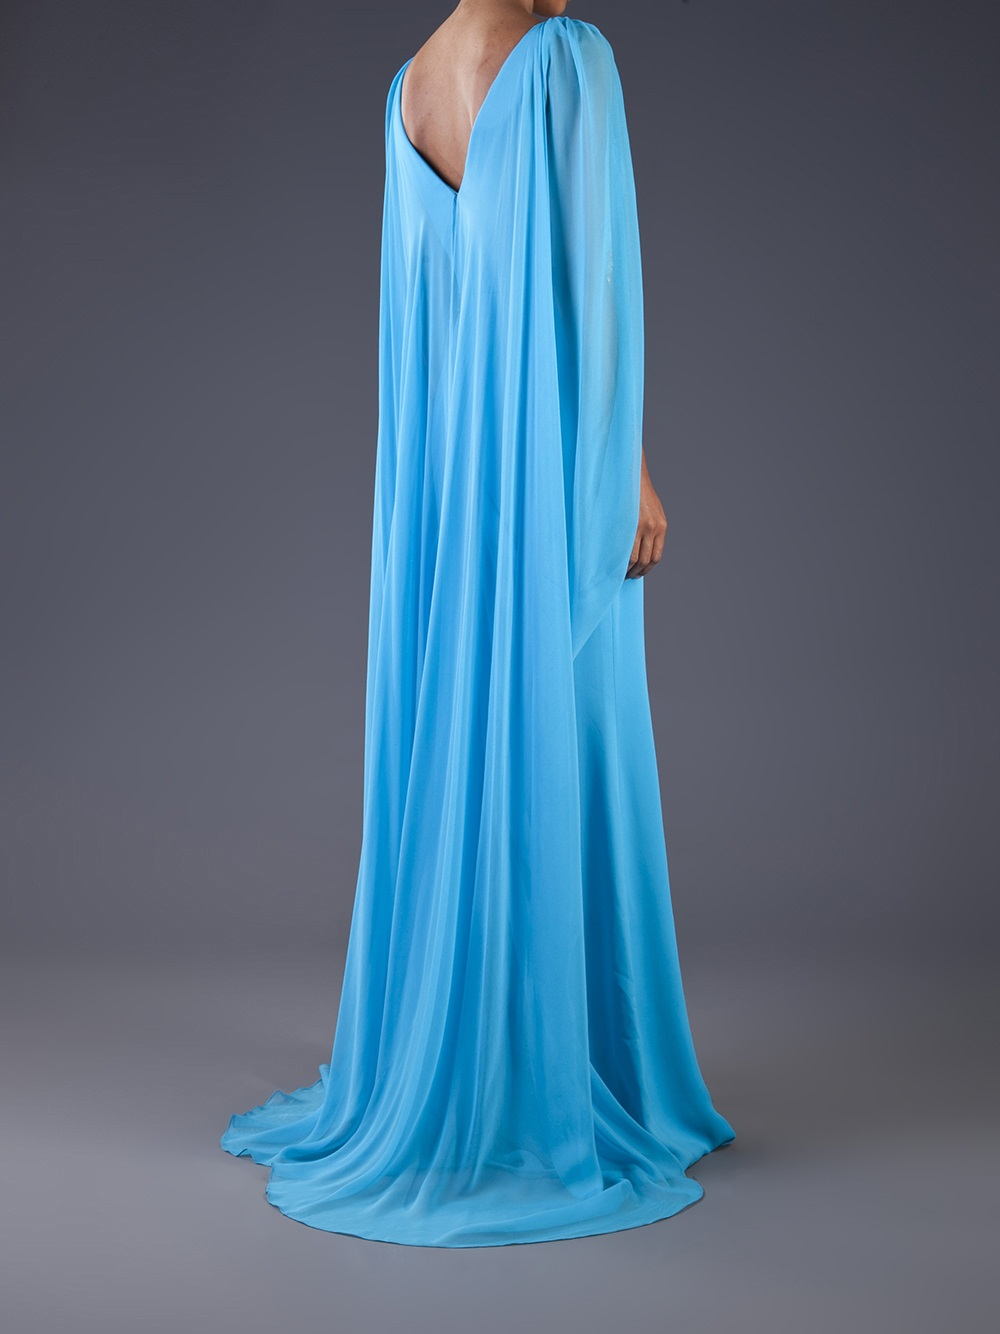 Lyst - Notte By Marchesa Sleeveless Draped Gown in Blue